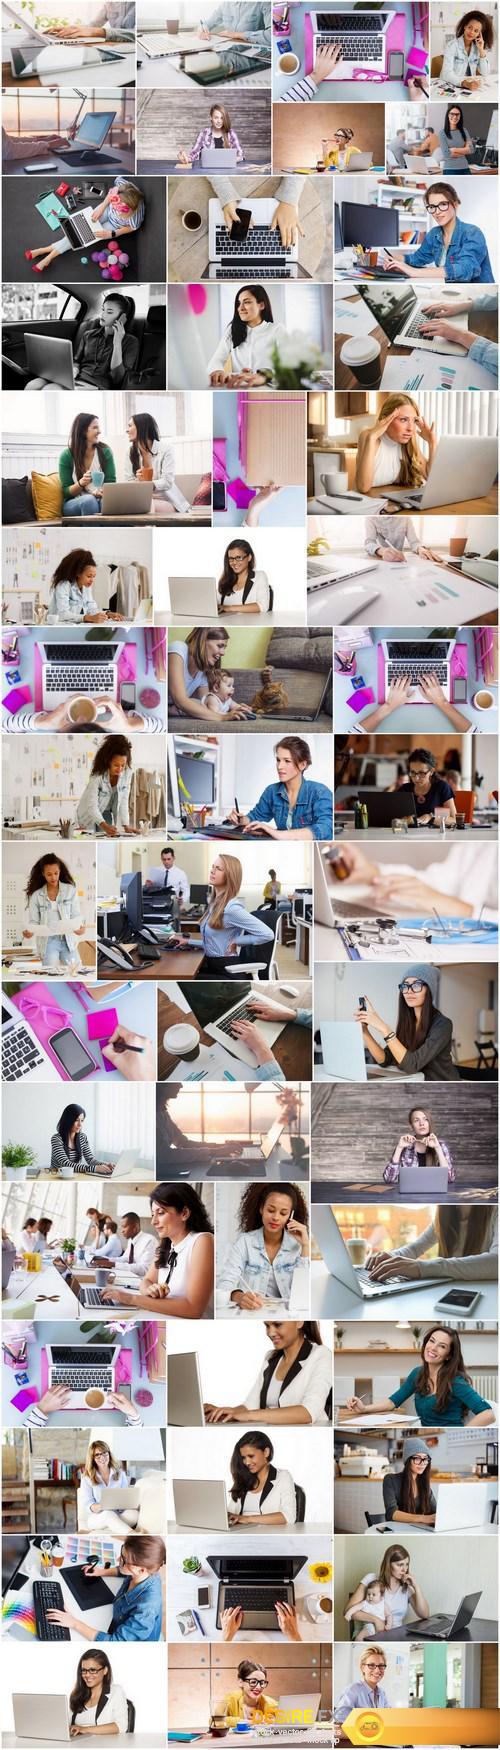 Businesswoman and workplace - 50xUHQ JPEG